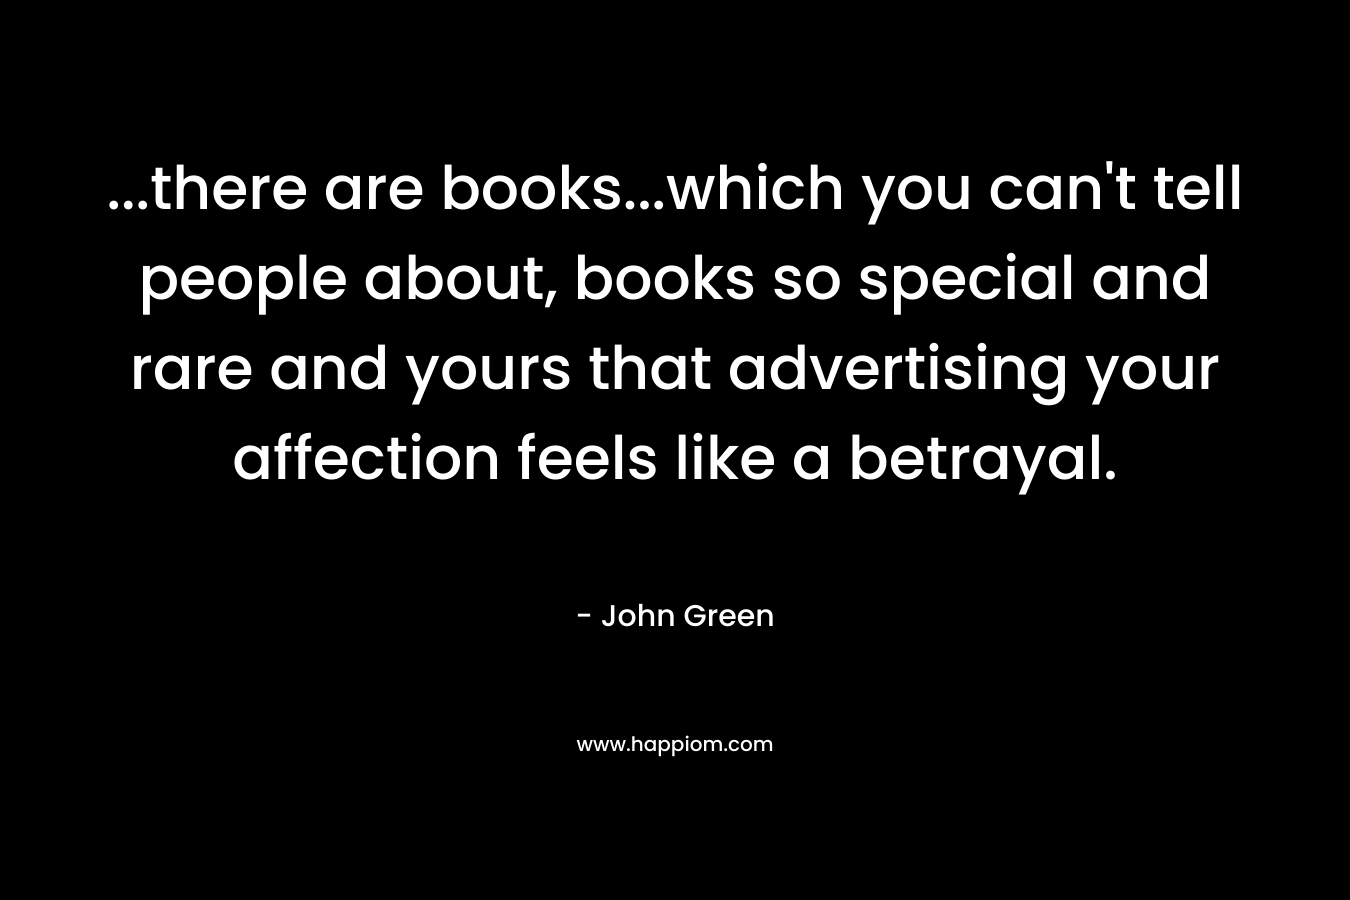 ...there are books...which you can't tell people about, books so special and rare and yours that advertising your affection feels like a betrayal.